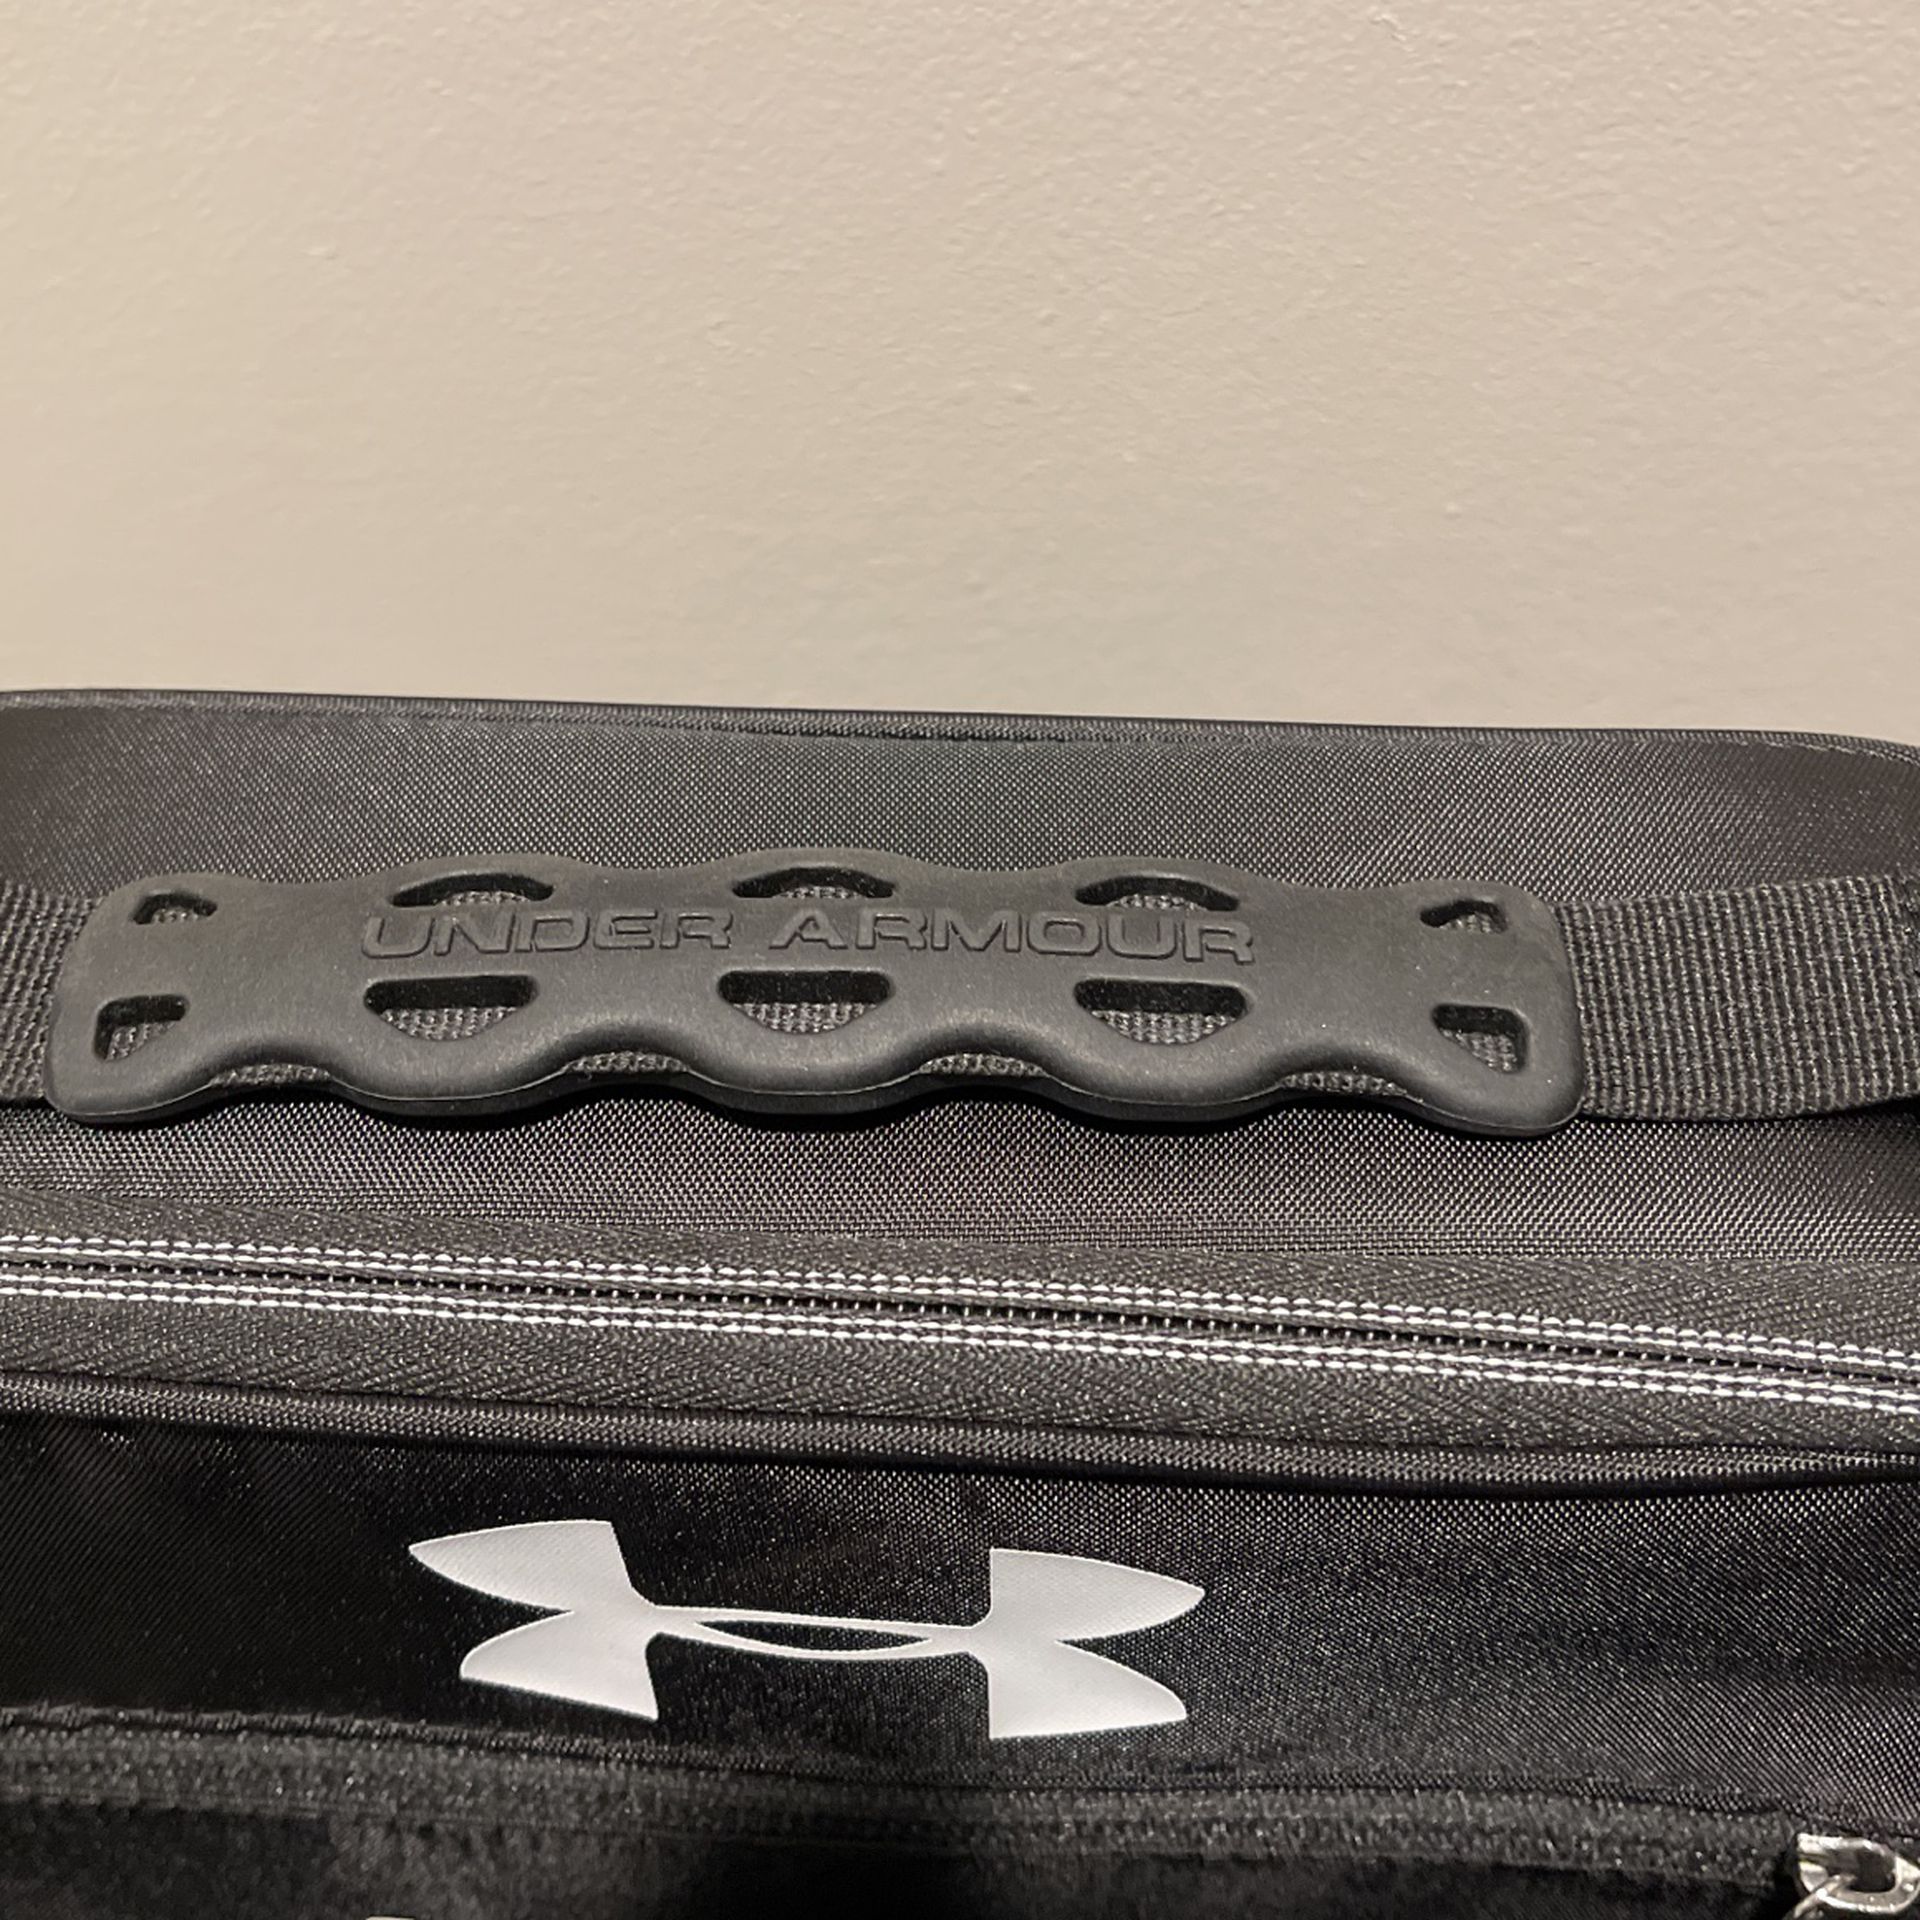 Under Armour Lunch Box for Sale in San Antonio, TX - OfferUp